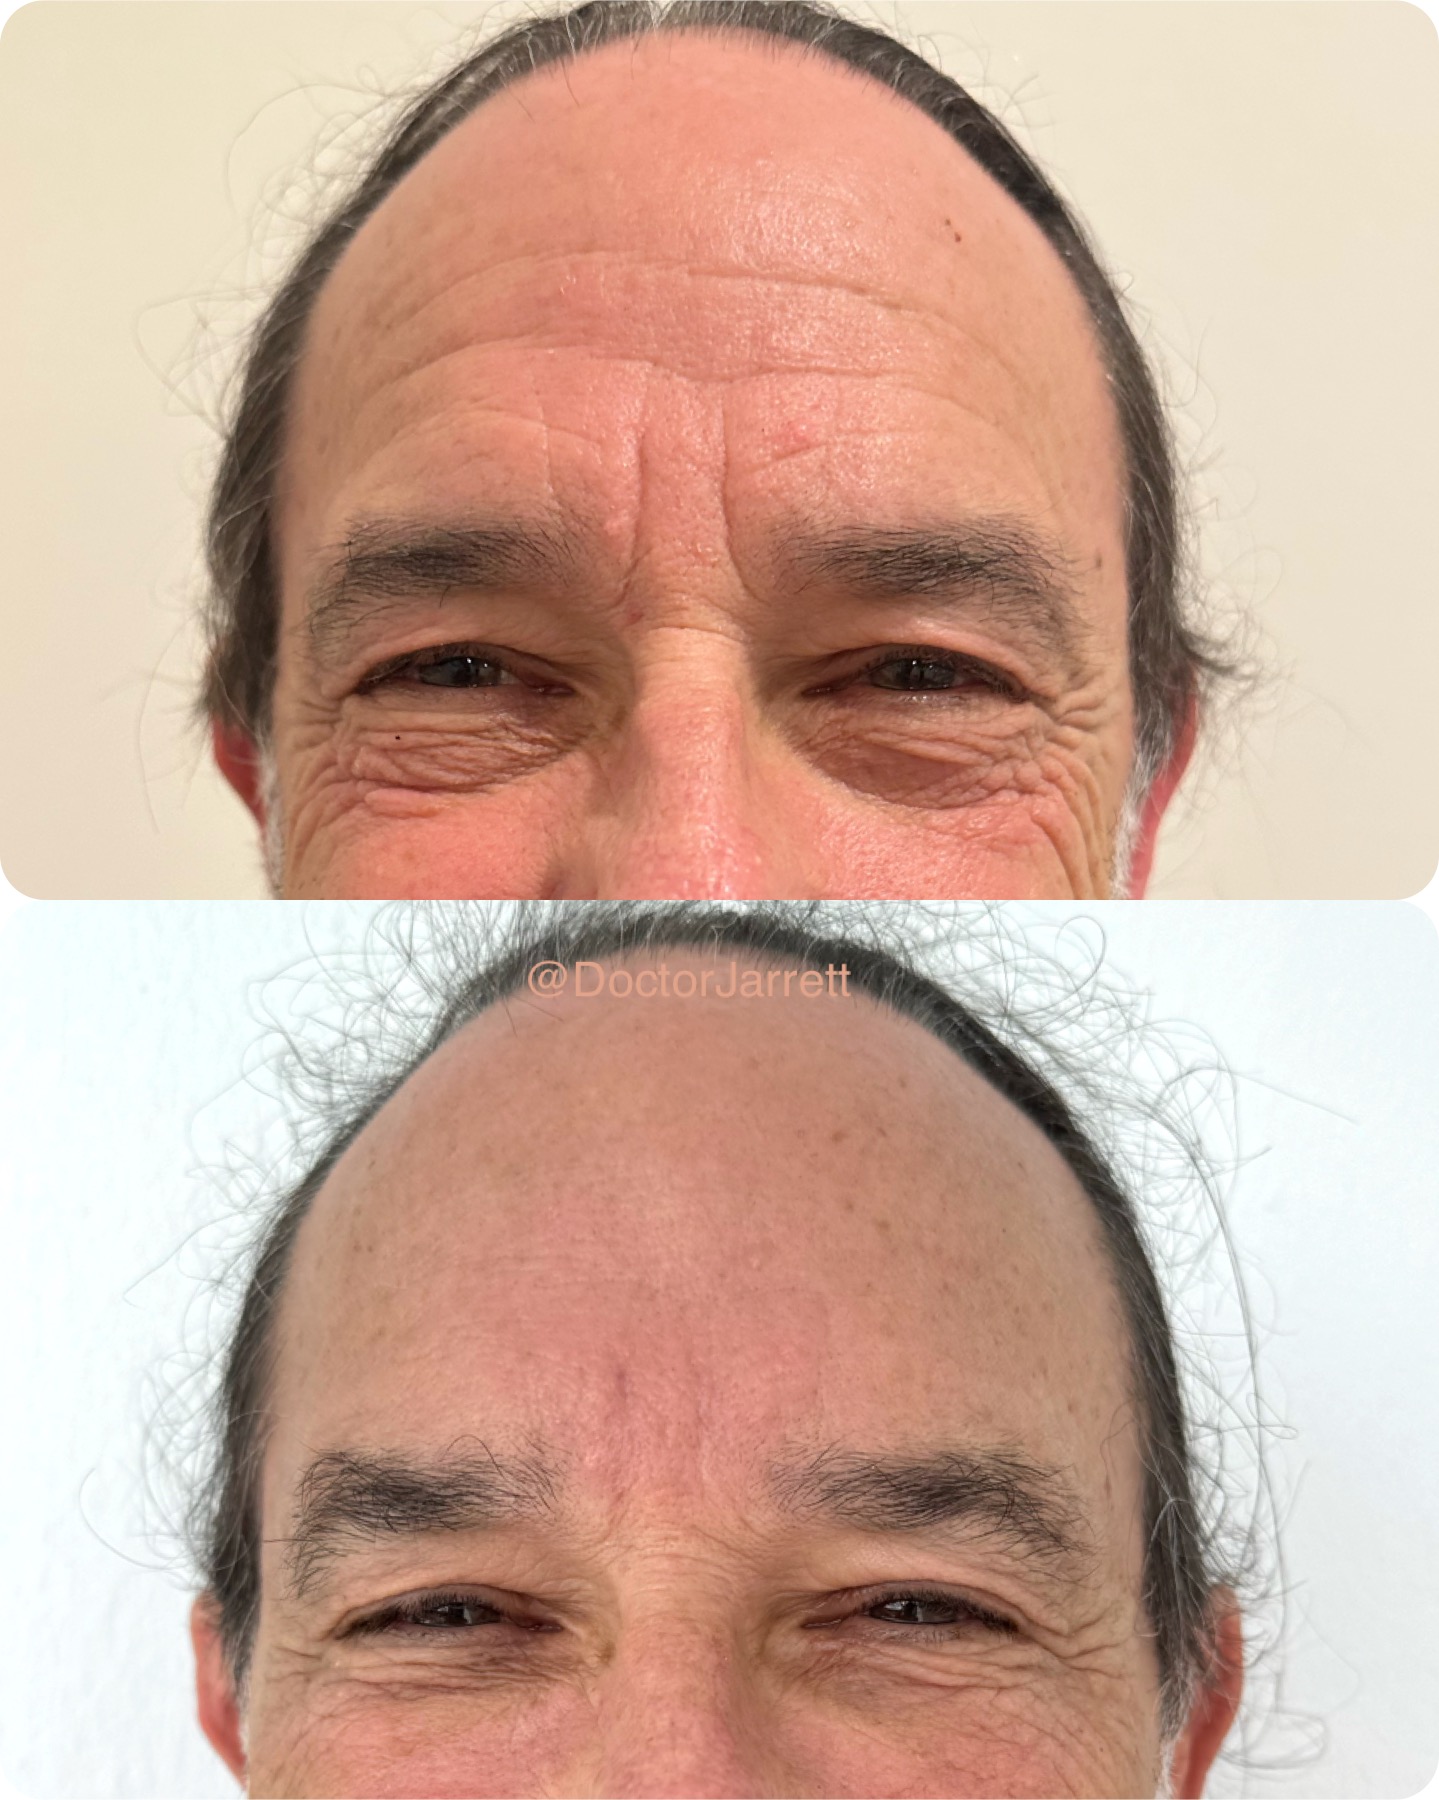 Forehead Filler Miami New York Med Spa Doctor Injecting Fillers Forehead Wrinkles Lines Aesthetics